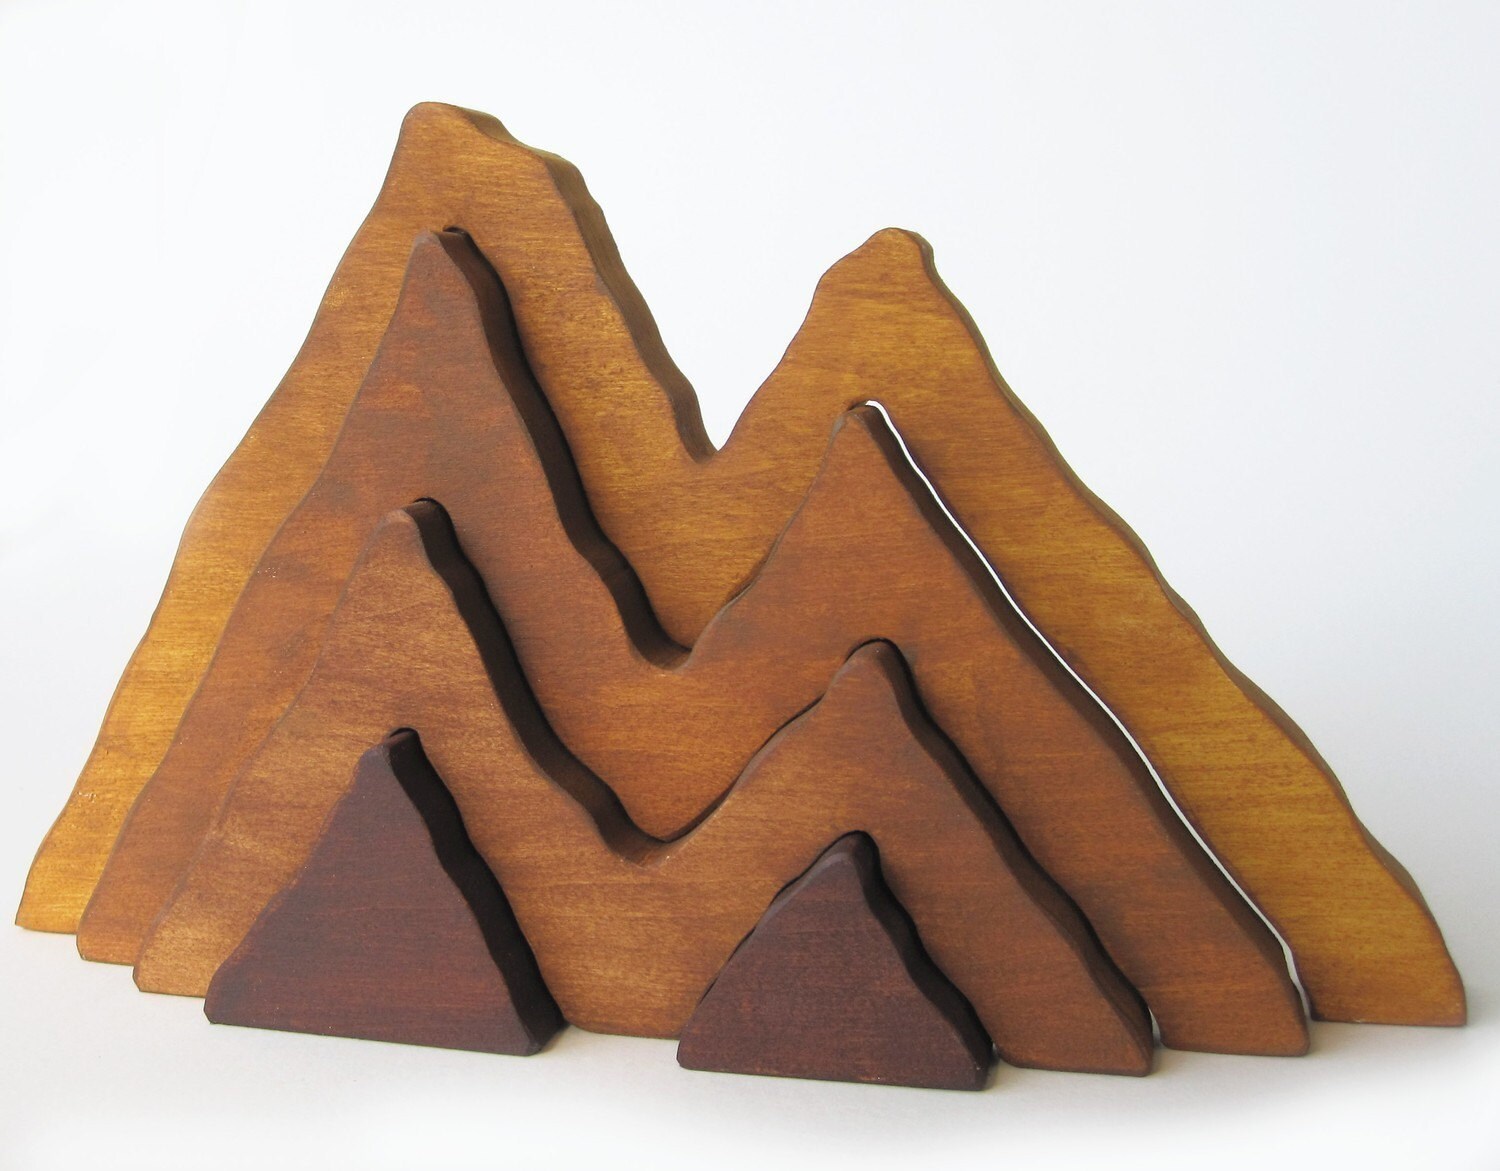 Wood Toy- Large Wooden Mountain Range Stacker Toy- Waldorf- Nature Table